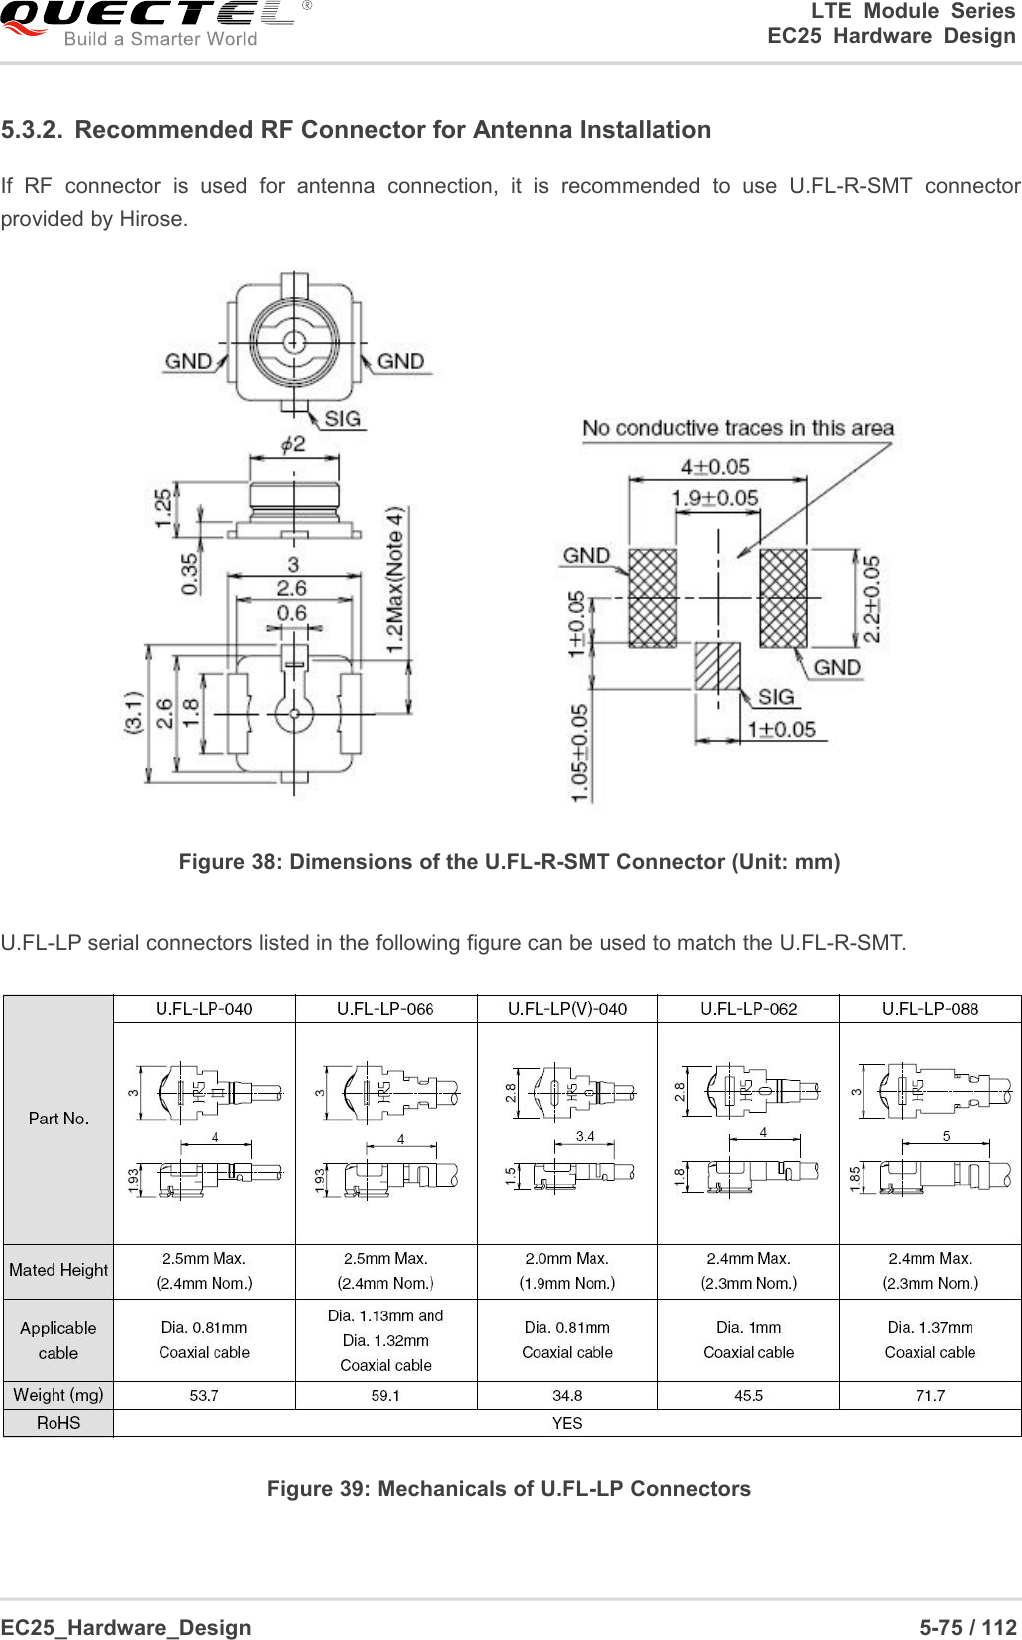 LTE Module SeriesEC25 Hardware DesignEC25_Hardware_Design 5-75 / 1125.3.2. Recommended RF Connector for Antenna InstallationIf RF connector is used for antenna connection, it is recommended to use U.FL-R-SMT connectorprovided by Hirose.Figure 38: Dimensions of the U.FL-R-SMT Connector (Unit: mm)U.FL-LP serial connectors listed in the following figure can be used to match the U.FL-R-SMT.Figure 39: Mechanicals of U.FL-LP Connectors